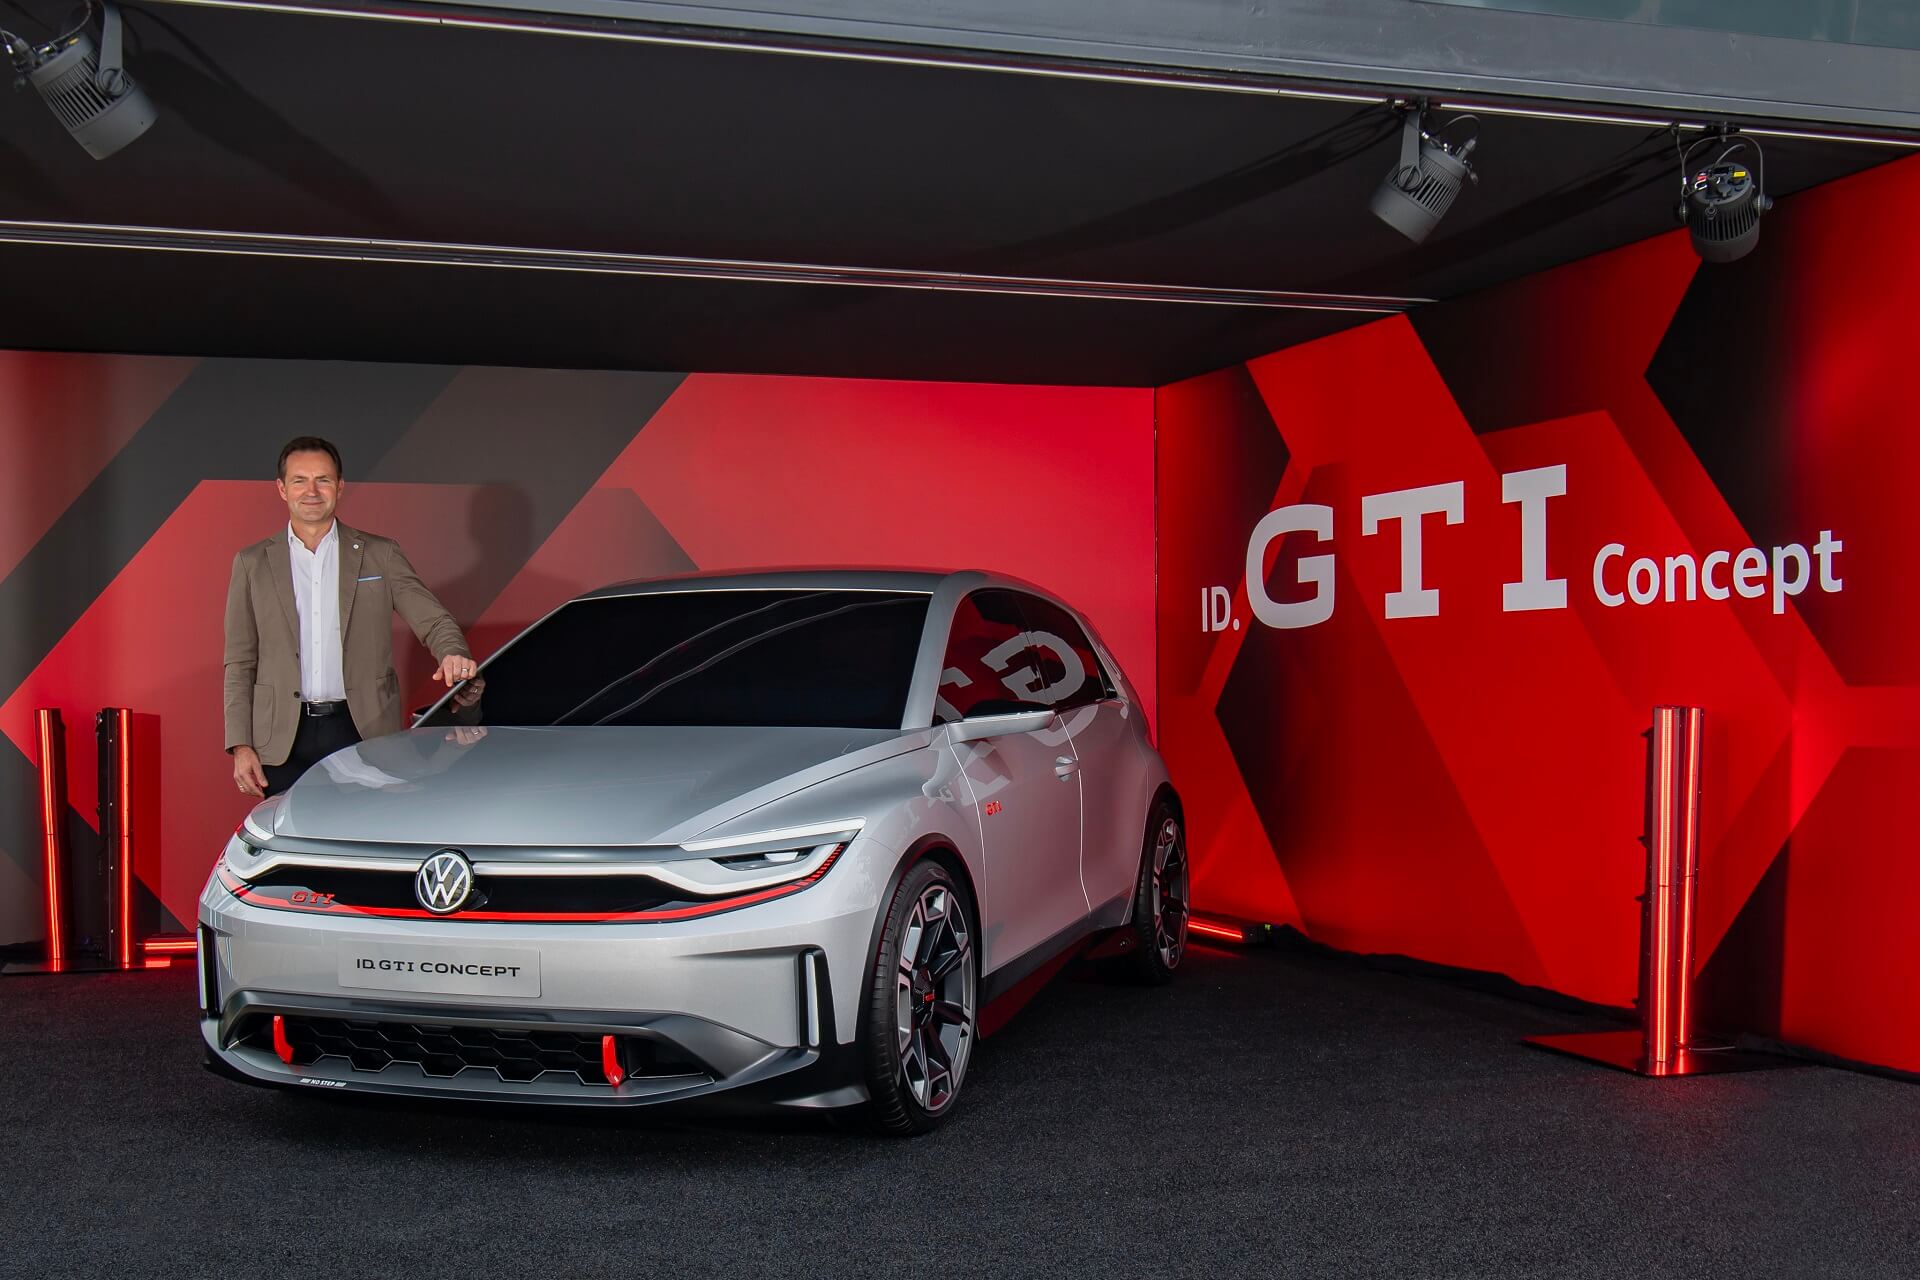 Thomas Schäfer, CEO of Volkswagen Brand and new ID.  GTI Concept.